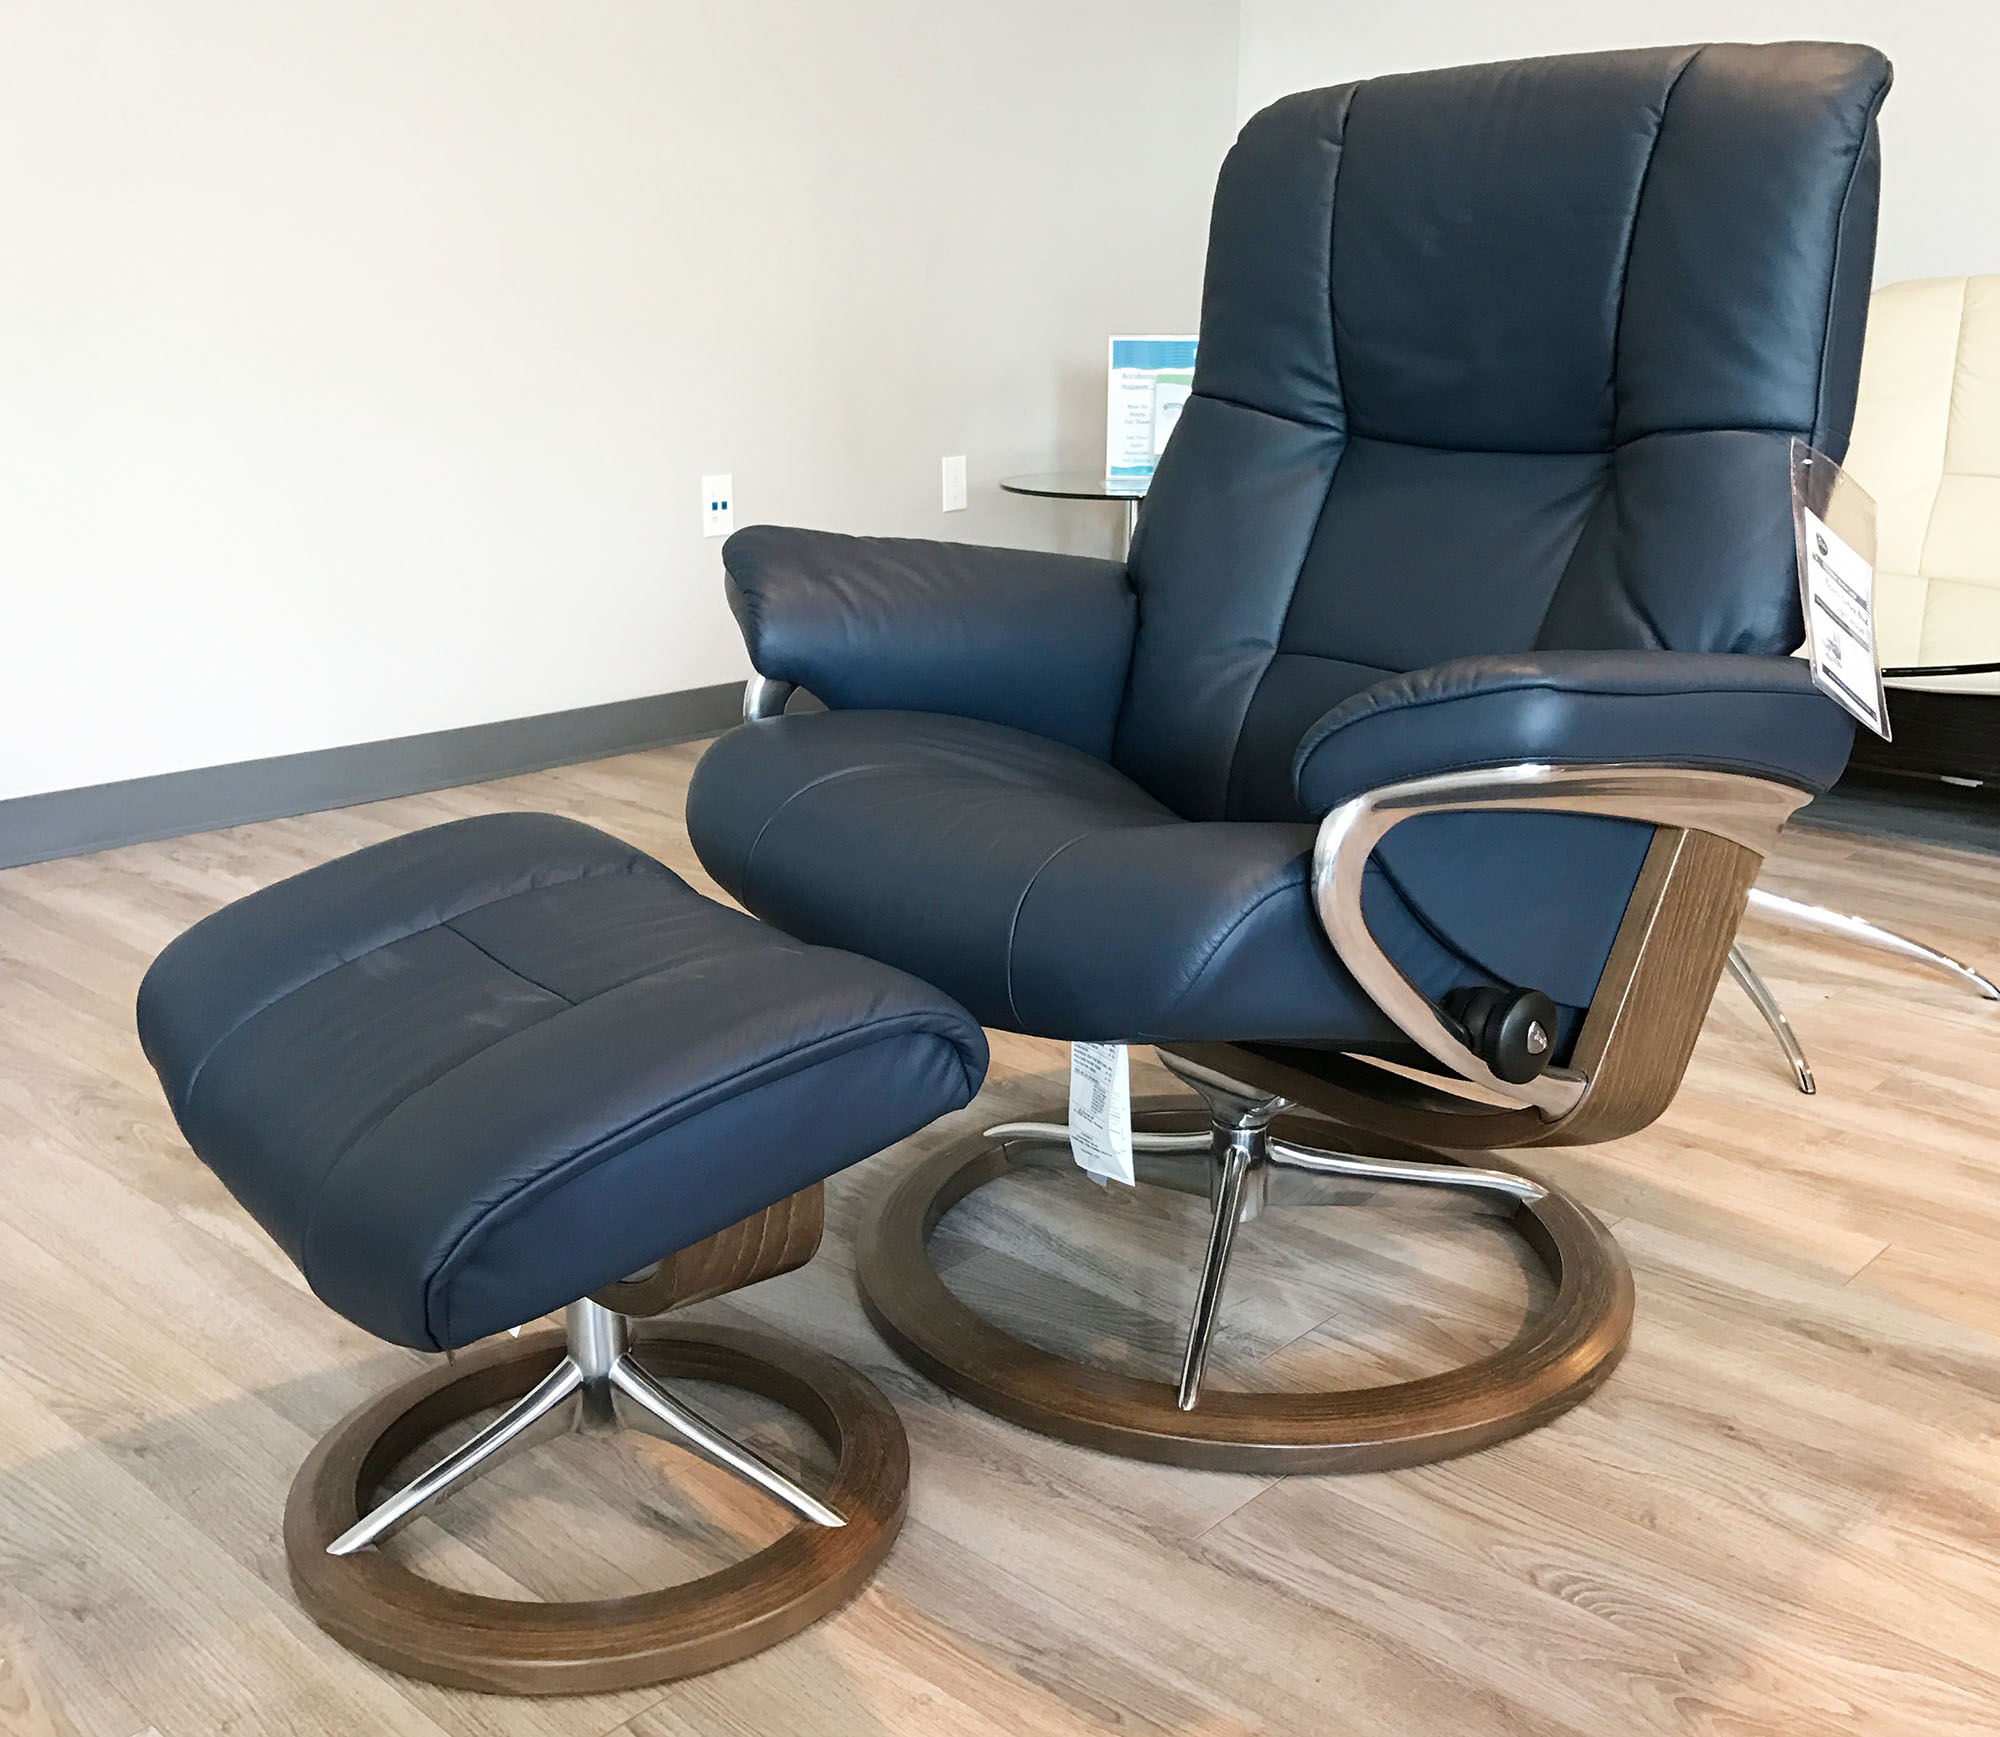 Ottoman Wood and Walnut Recliner Blue Oxford Leather Mayfair Paloma Stressless Ekornes by Signature Chair